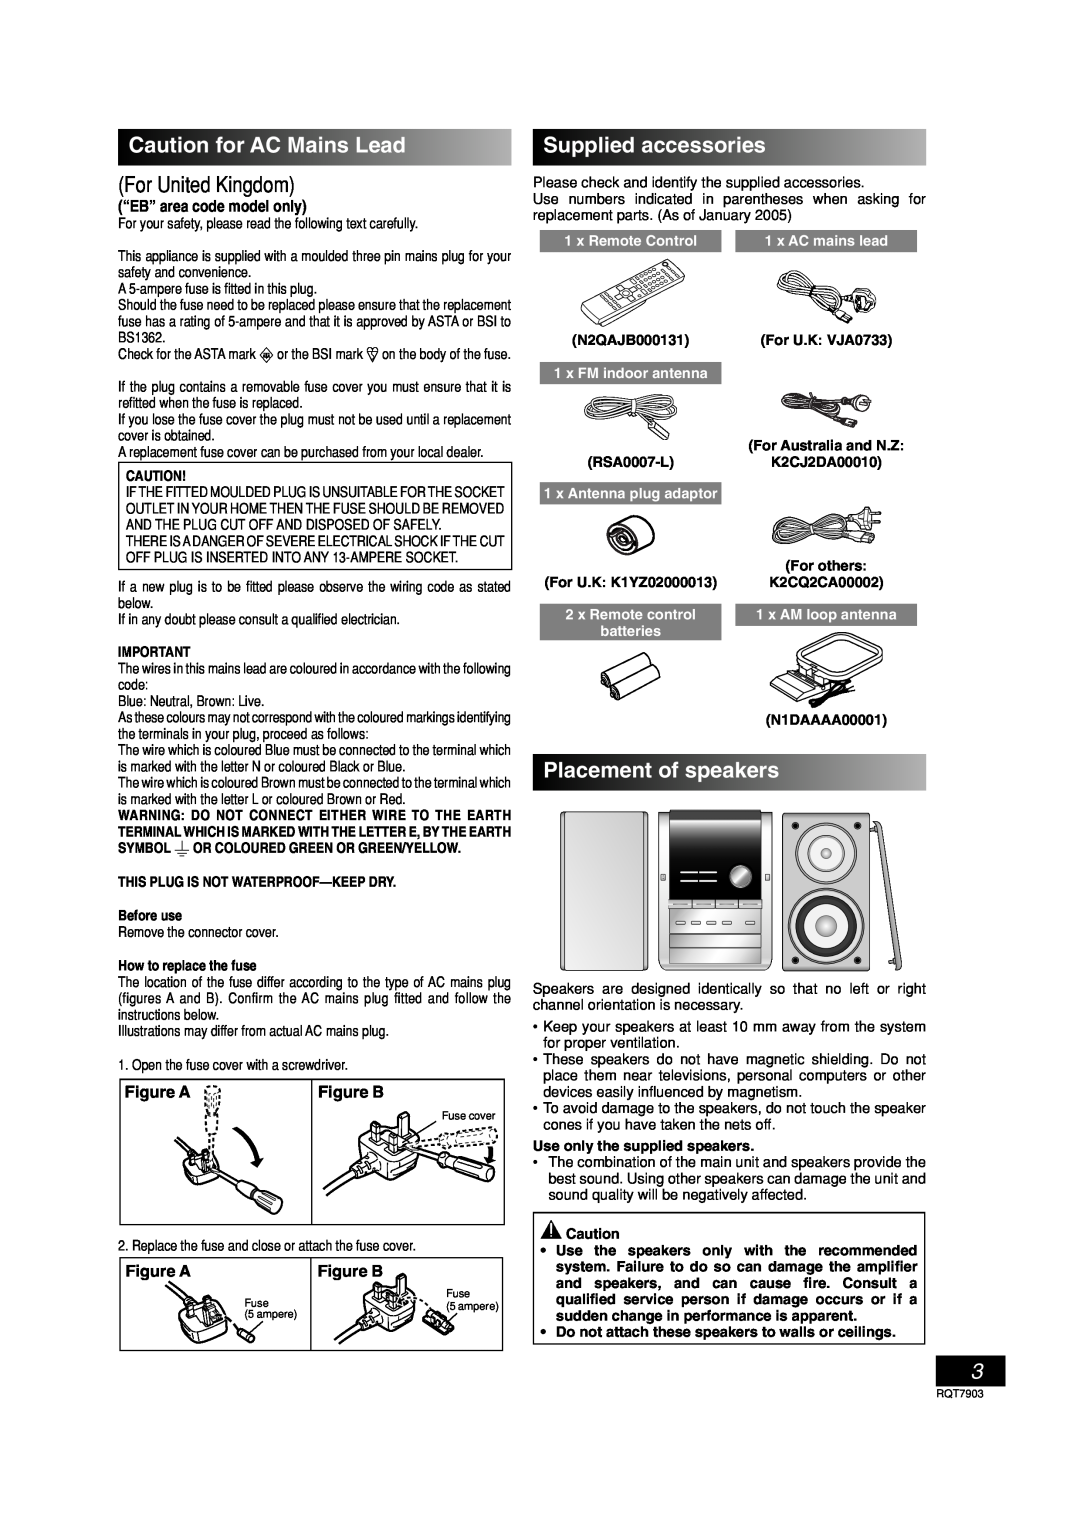 Panasonic SC-PM21 specifications Caution for AC Mains Lead, For United Kingdom, Supplied accessories, Placement of speakers 